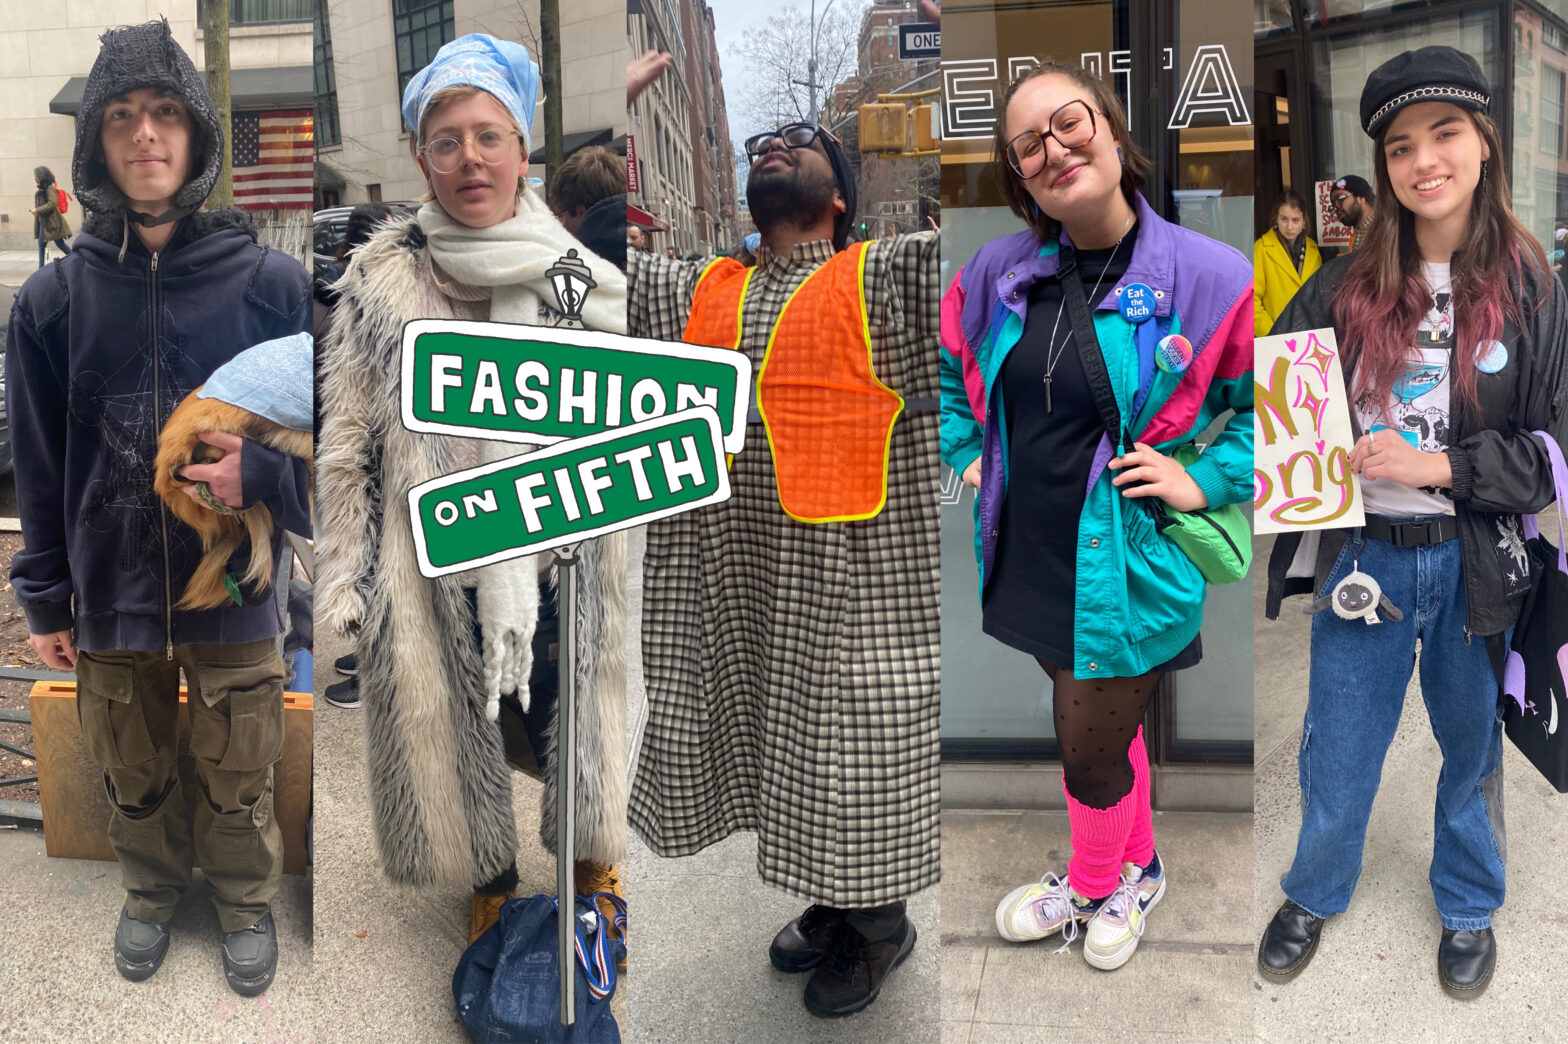 Five New School students collaged side-by-side. In the middle is an illustrated street sign that says “Fashion on Fifth.”